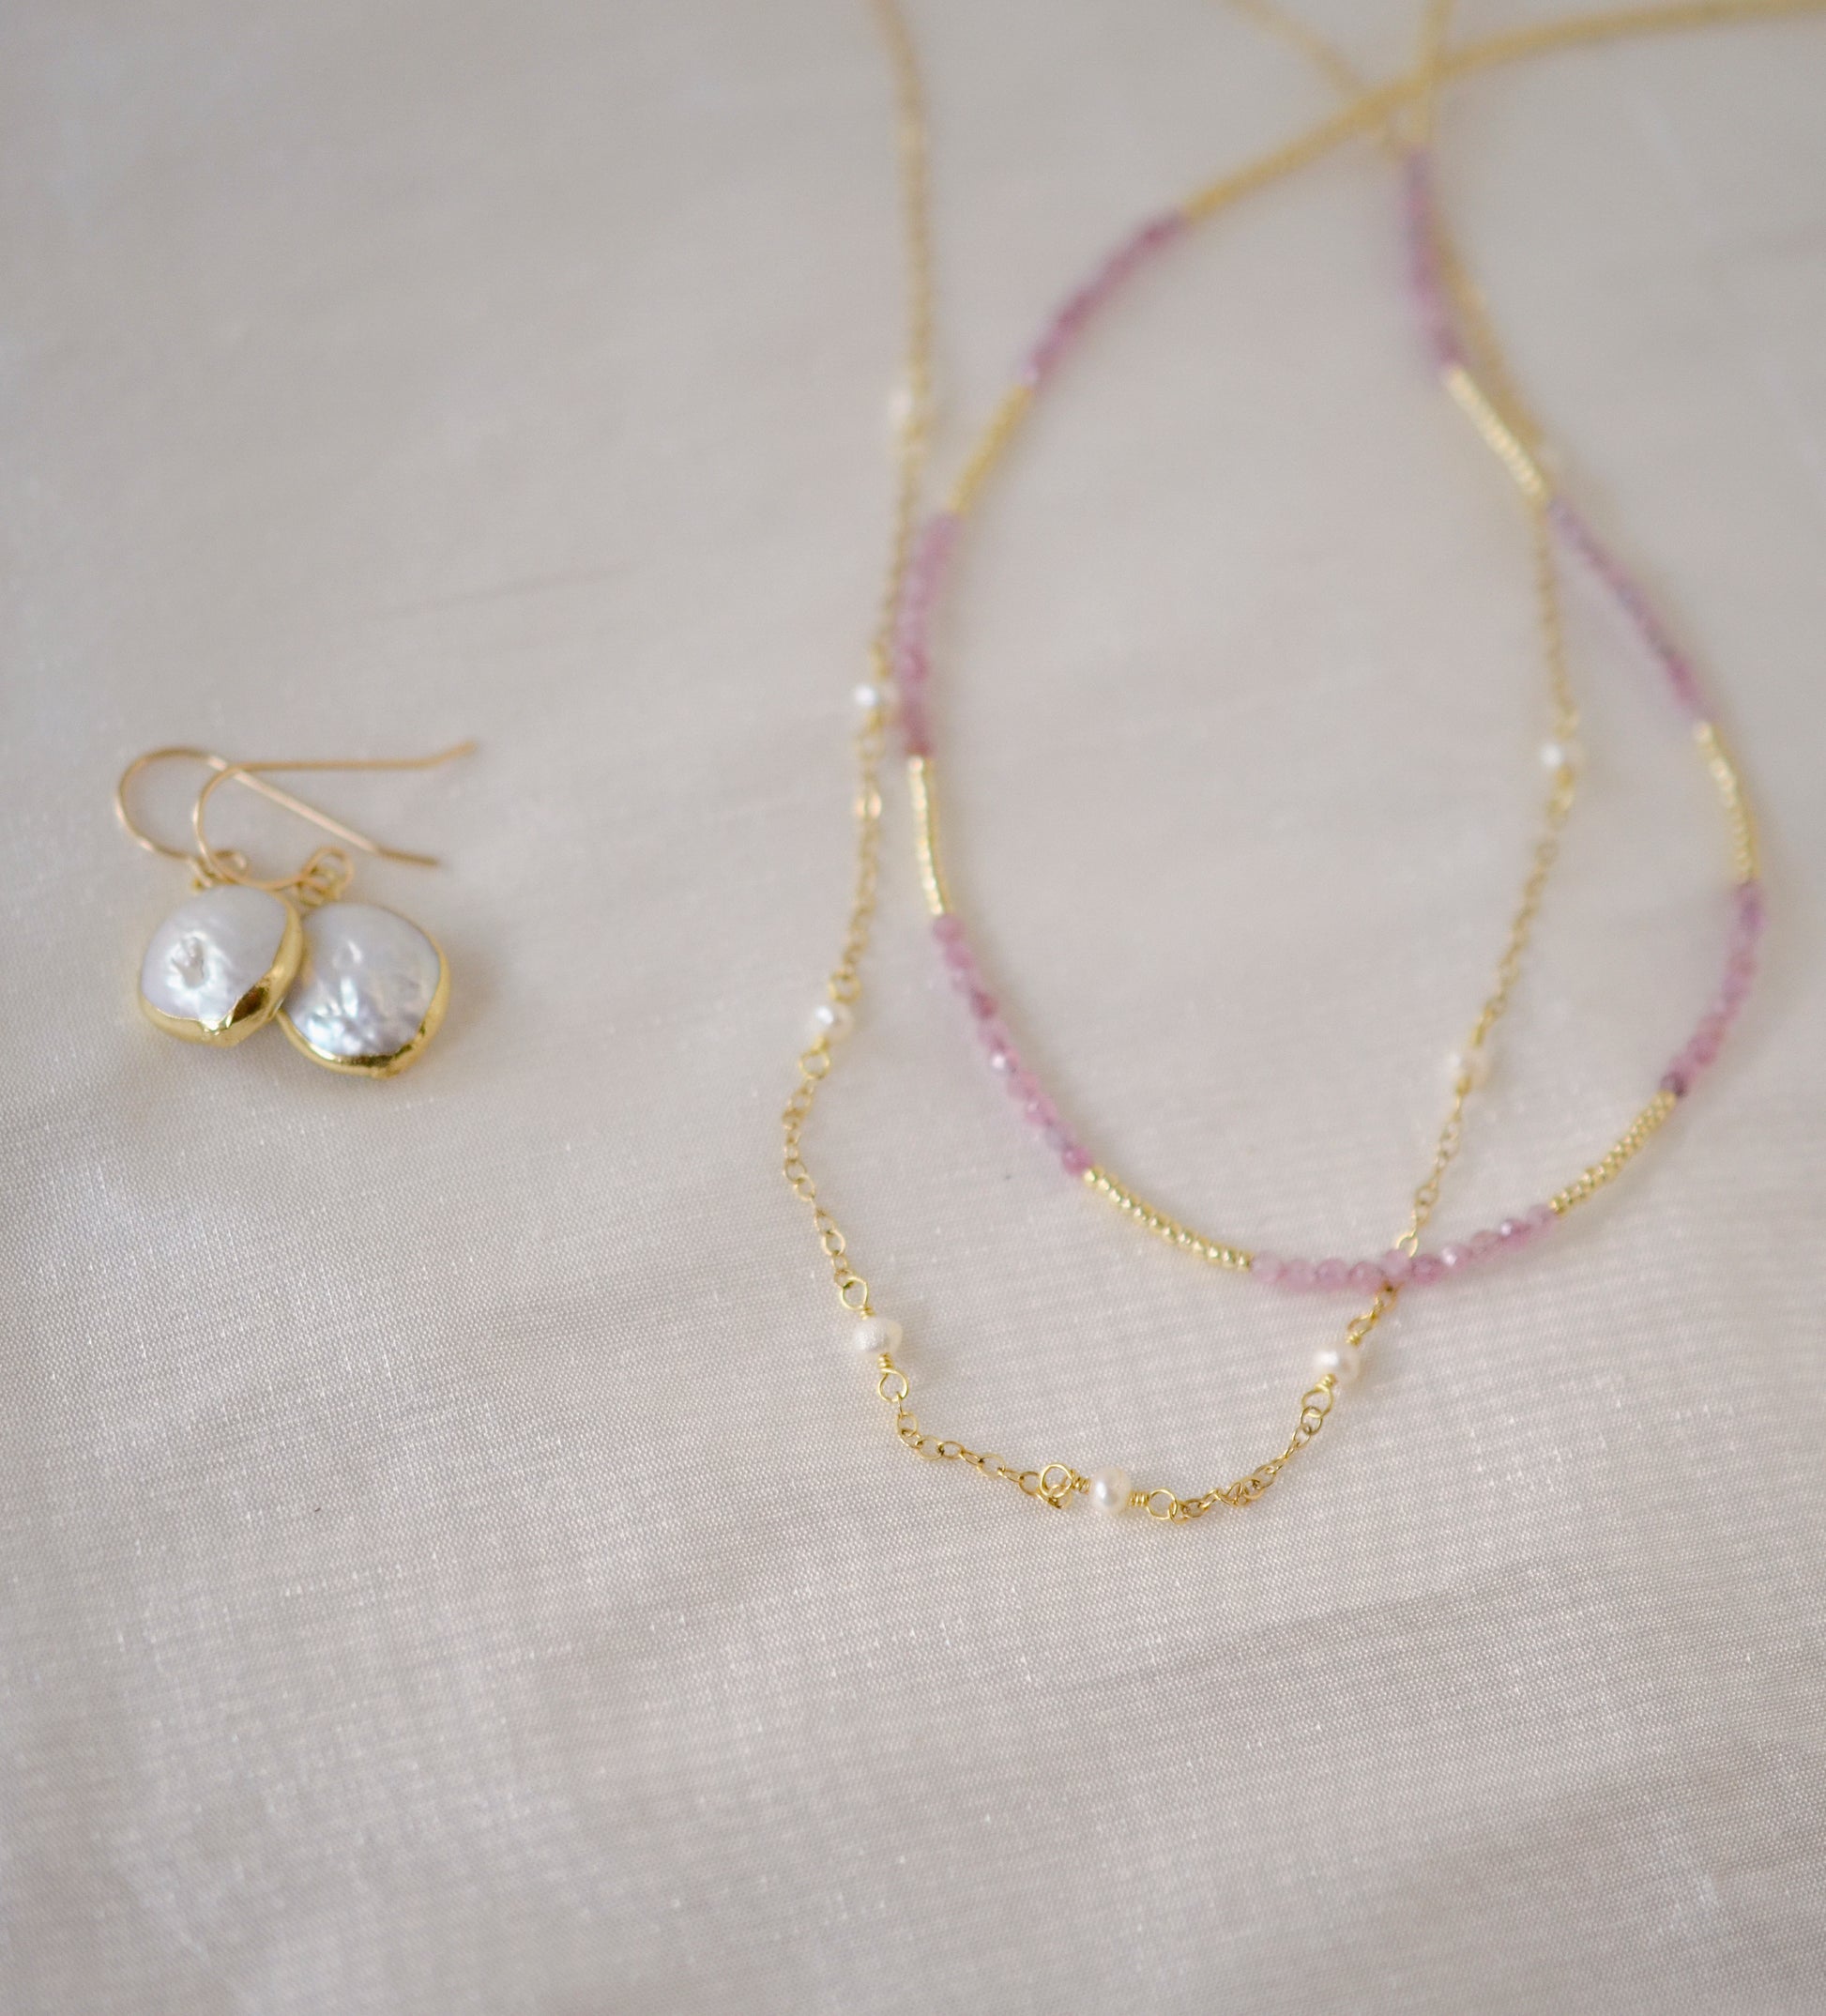 Genuine white freshwater pearls set onto a 14k gold filled chain. Shown with matching pearl earrings and a pick tourmaline necklace.